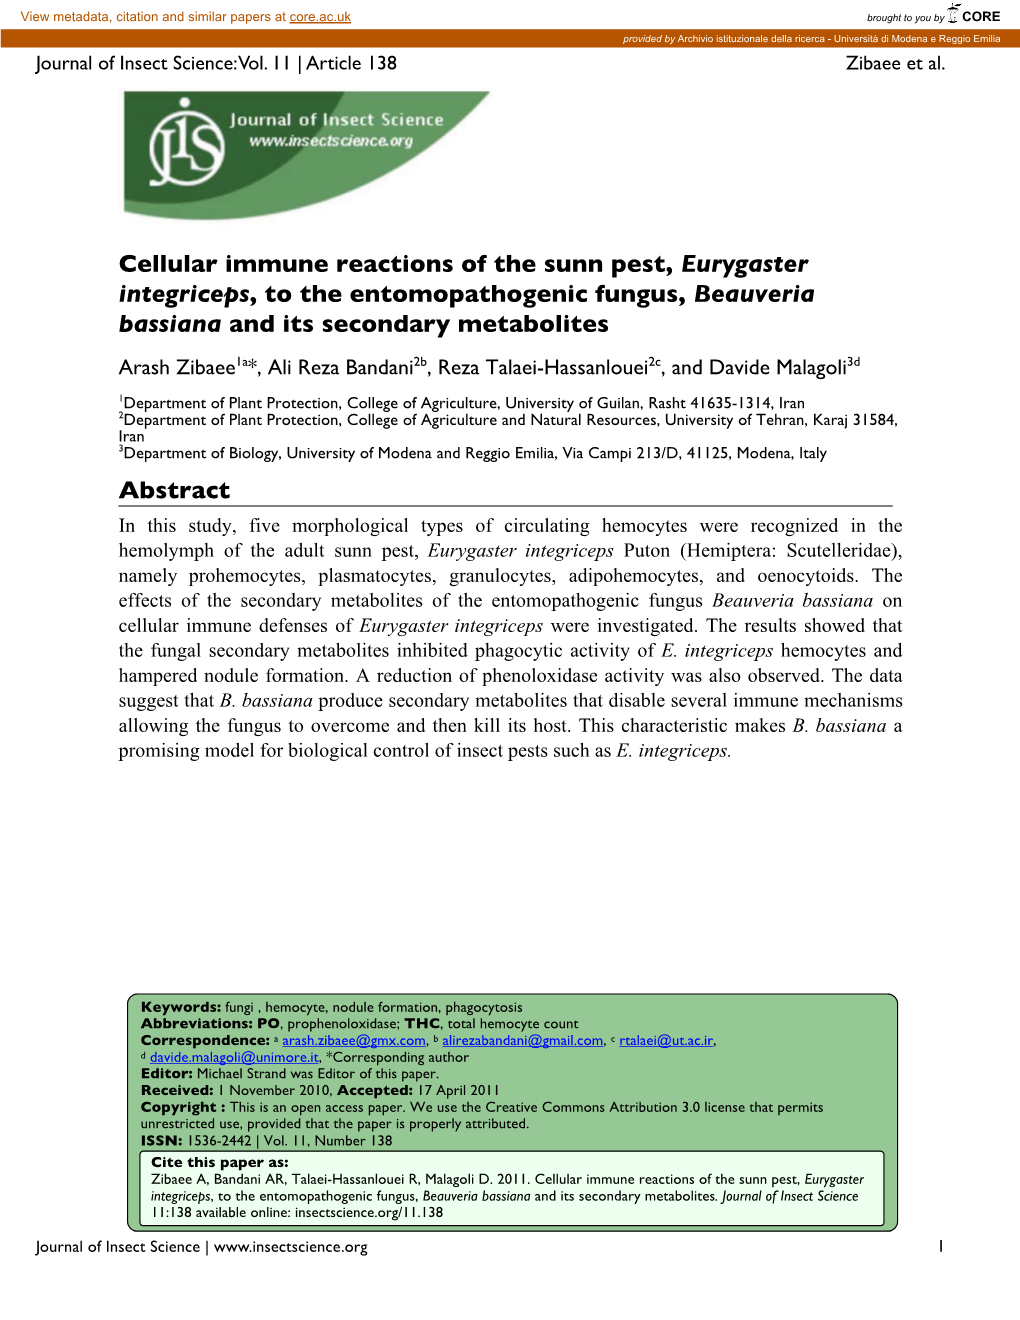 Cellular Immune Reactions of the Sunn Pest, Eurygaster Integriceps, to The